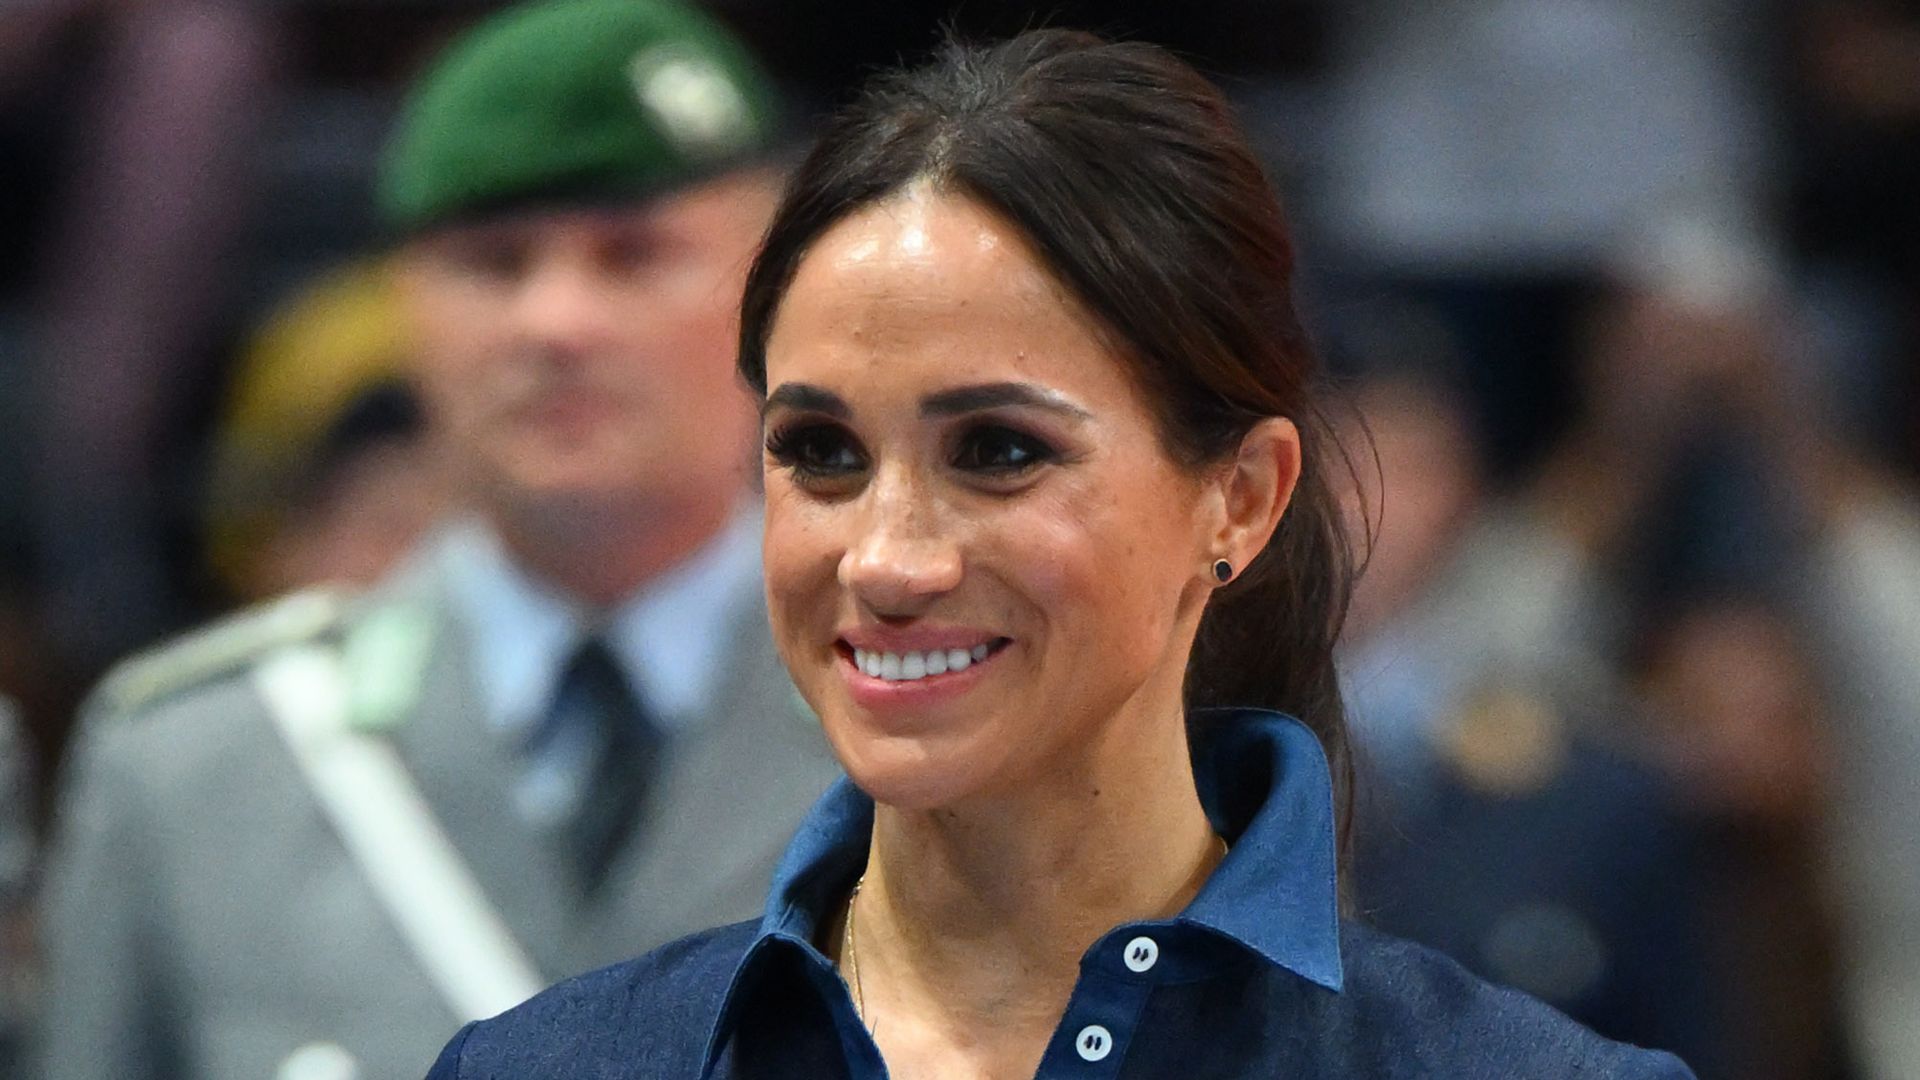 Meghan Markle in blue outfit